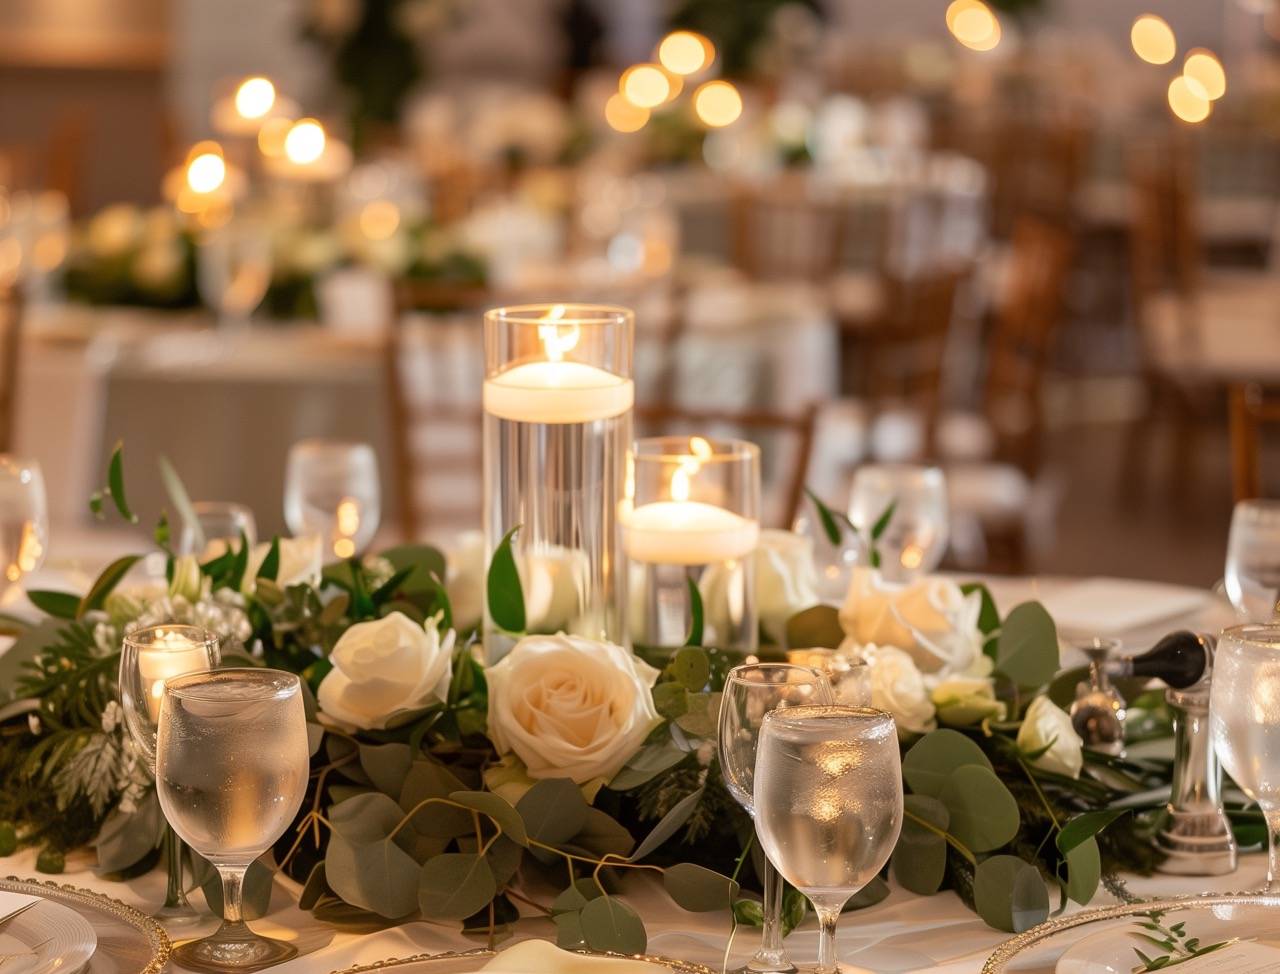 A table set with flowers and candles is a great wedding theme fundraiser venue table decor idea